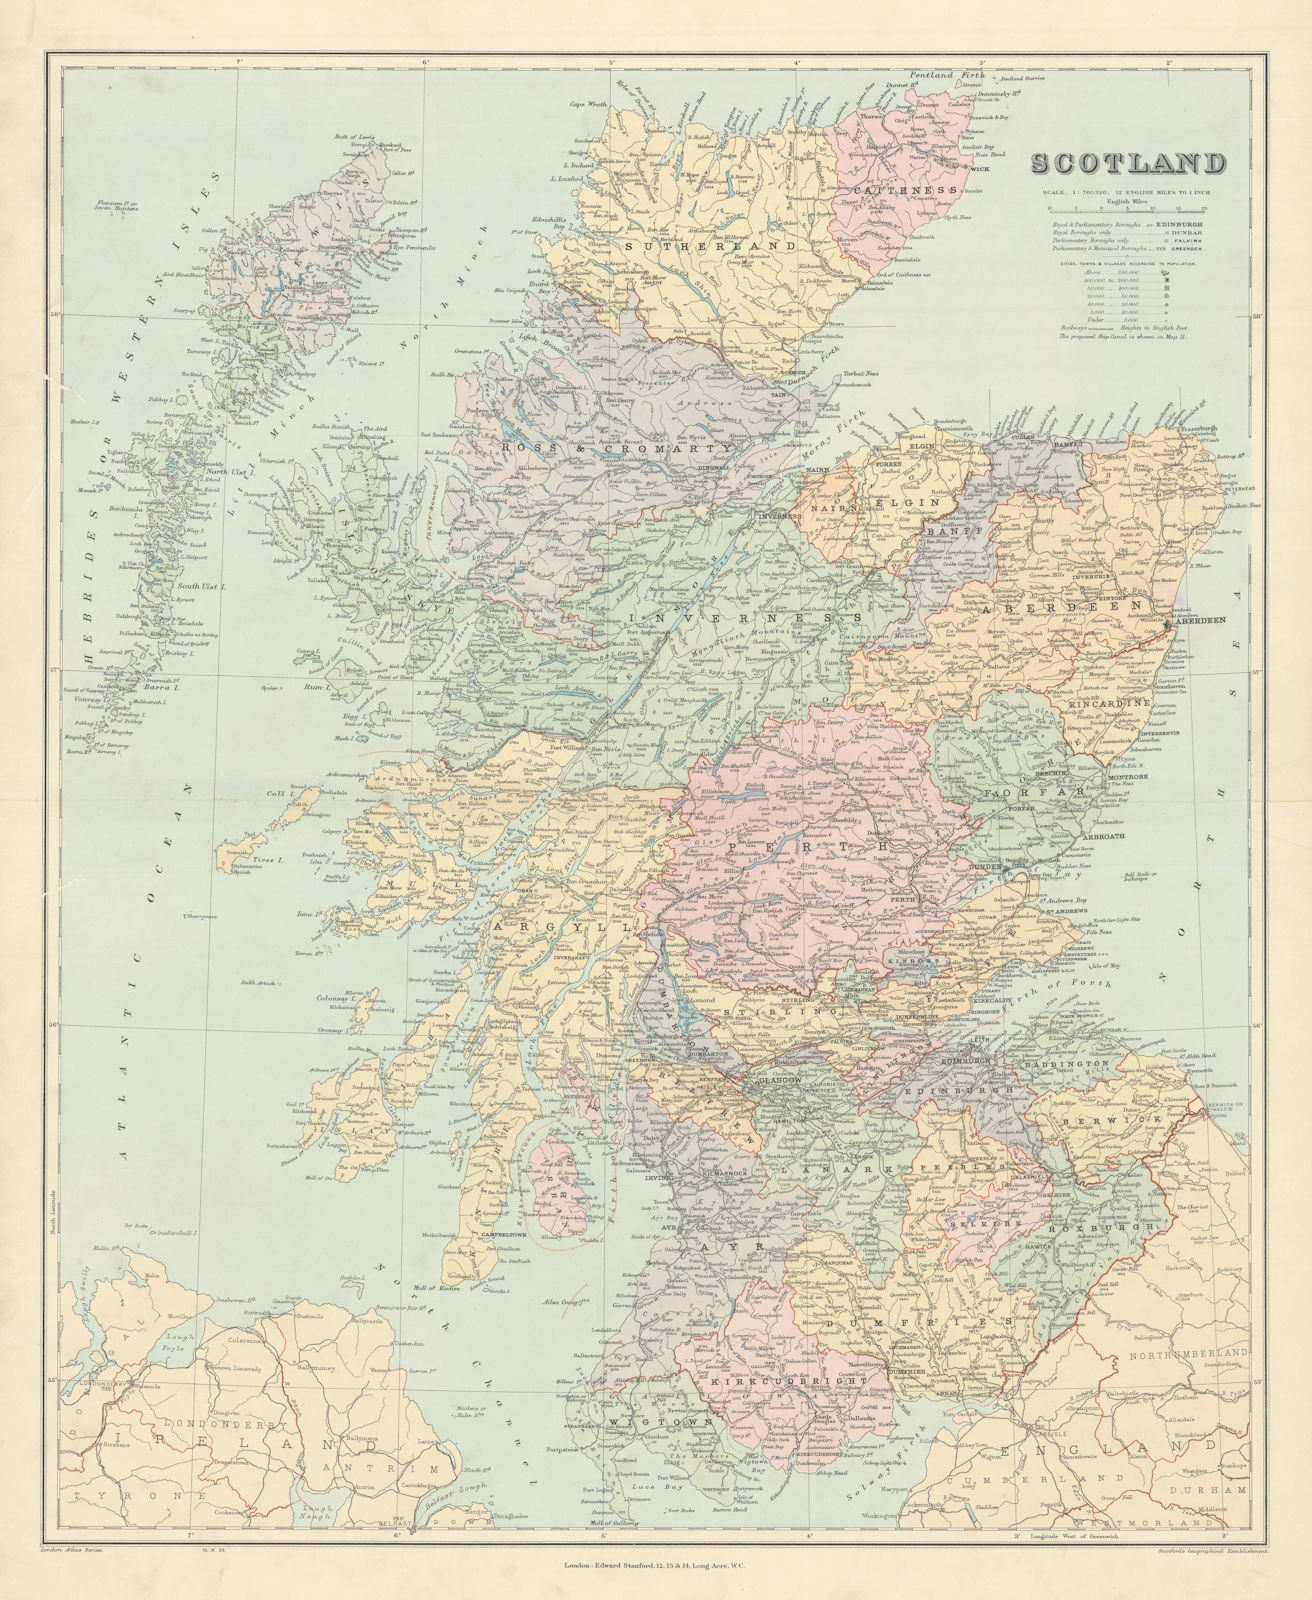 Scotland. Counties & railways. Large 66x54cm. STANFORD 1904 old antique map